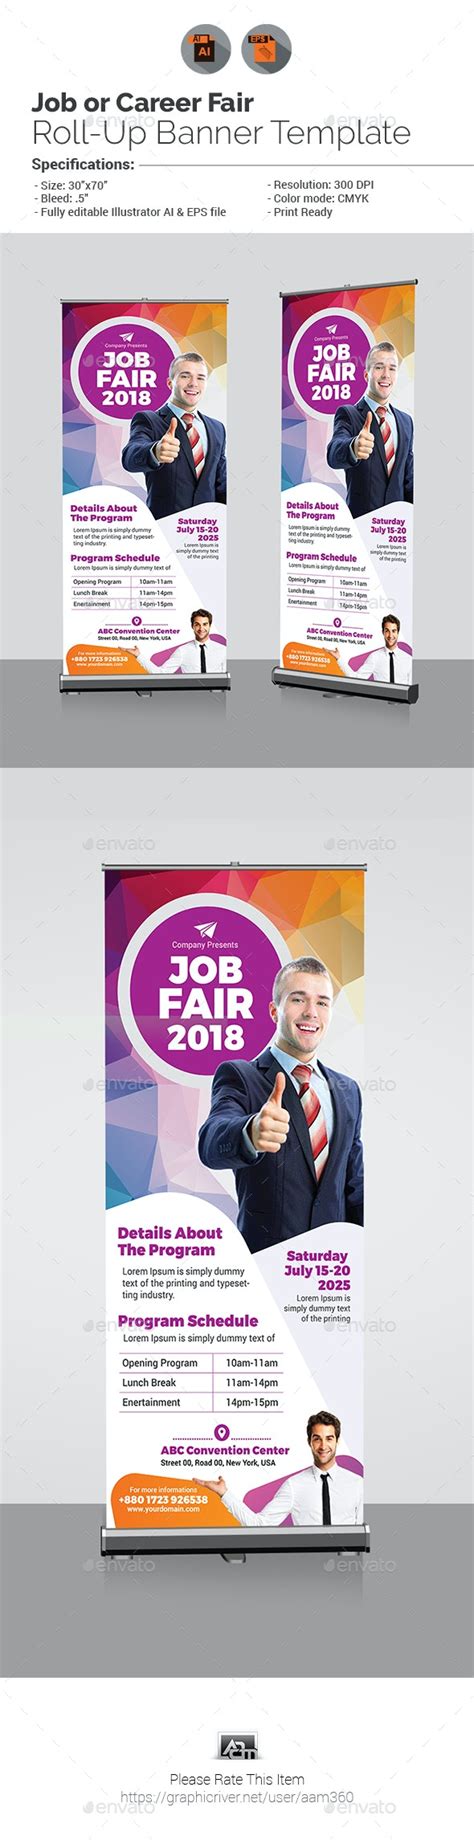 Job Fair Roll Up Banner Template By Aam360 Graphicriver